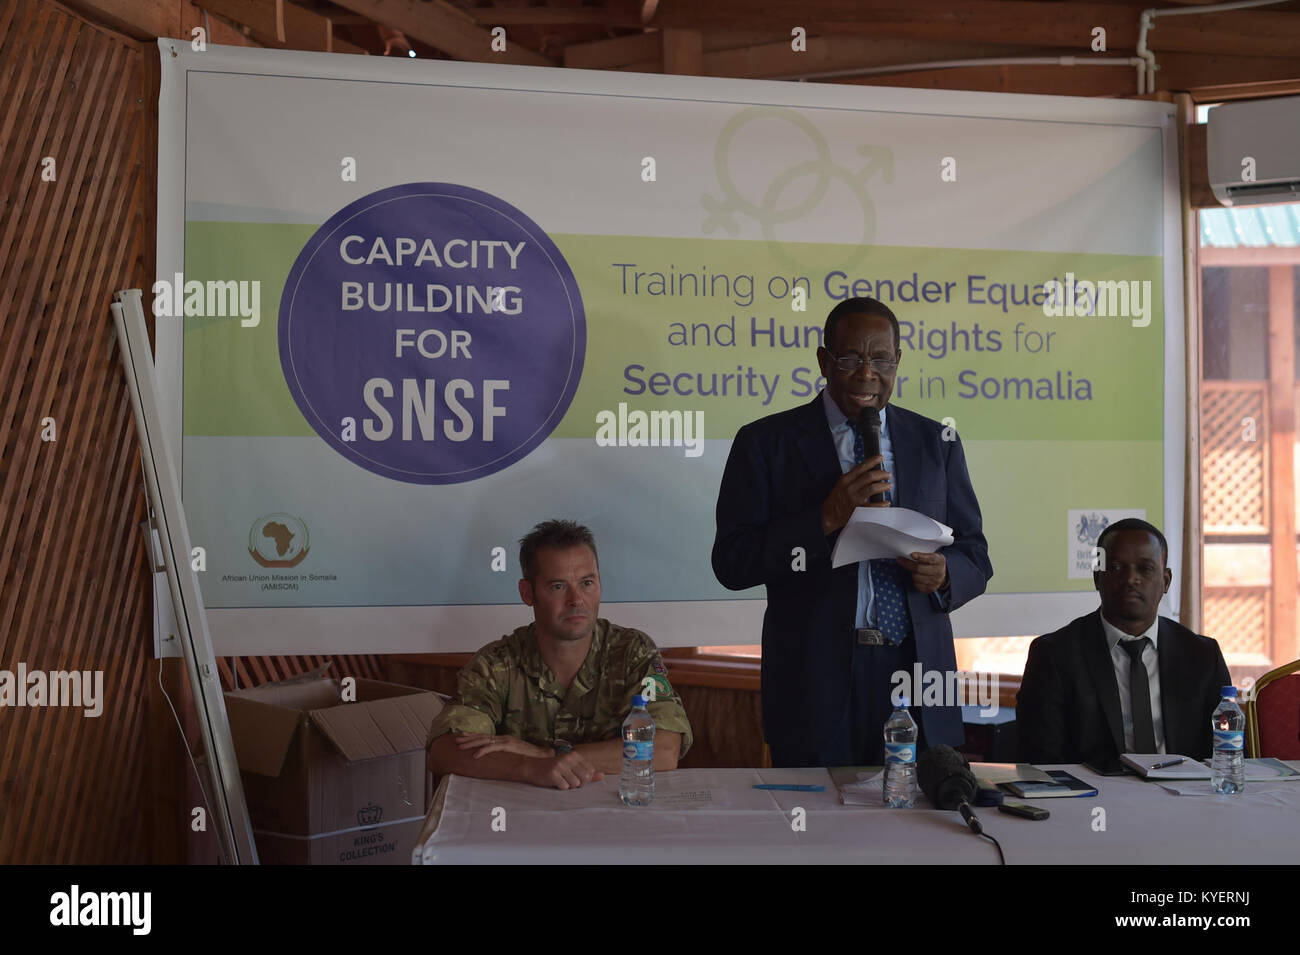 AMISOM Head of Mission and SRCC Ambasdsador Francisco Madiera speaks at the opening of the Security Sector Gender Training Workshop for SNSF, FGS, and FMS forces in Mogadishu, Somalia, on November 22, 2017. AMISOM Photo Stock Photo